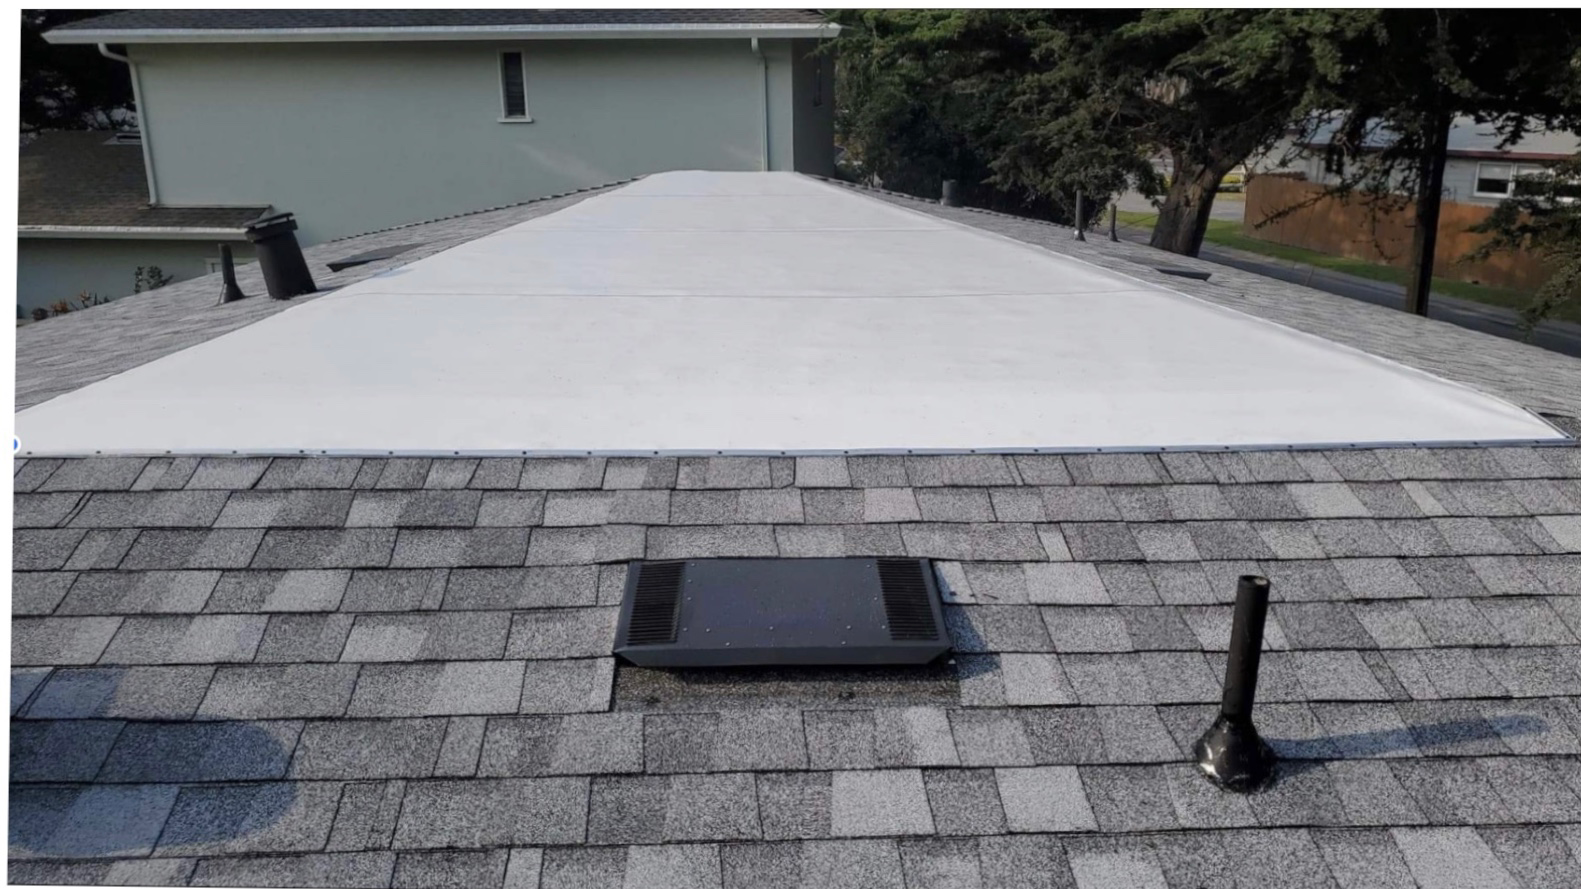 DC ROOFING & WATERPROOFING SYSTEMS INC